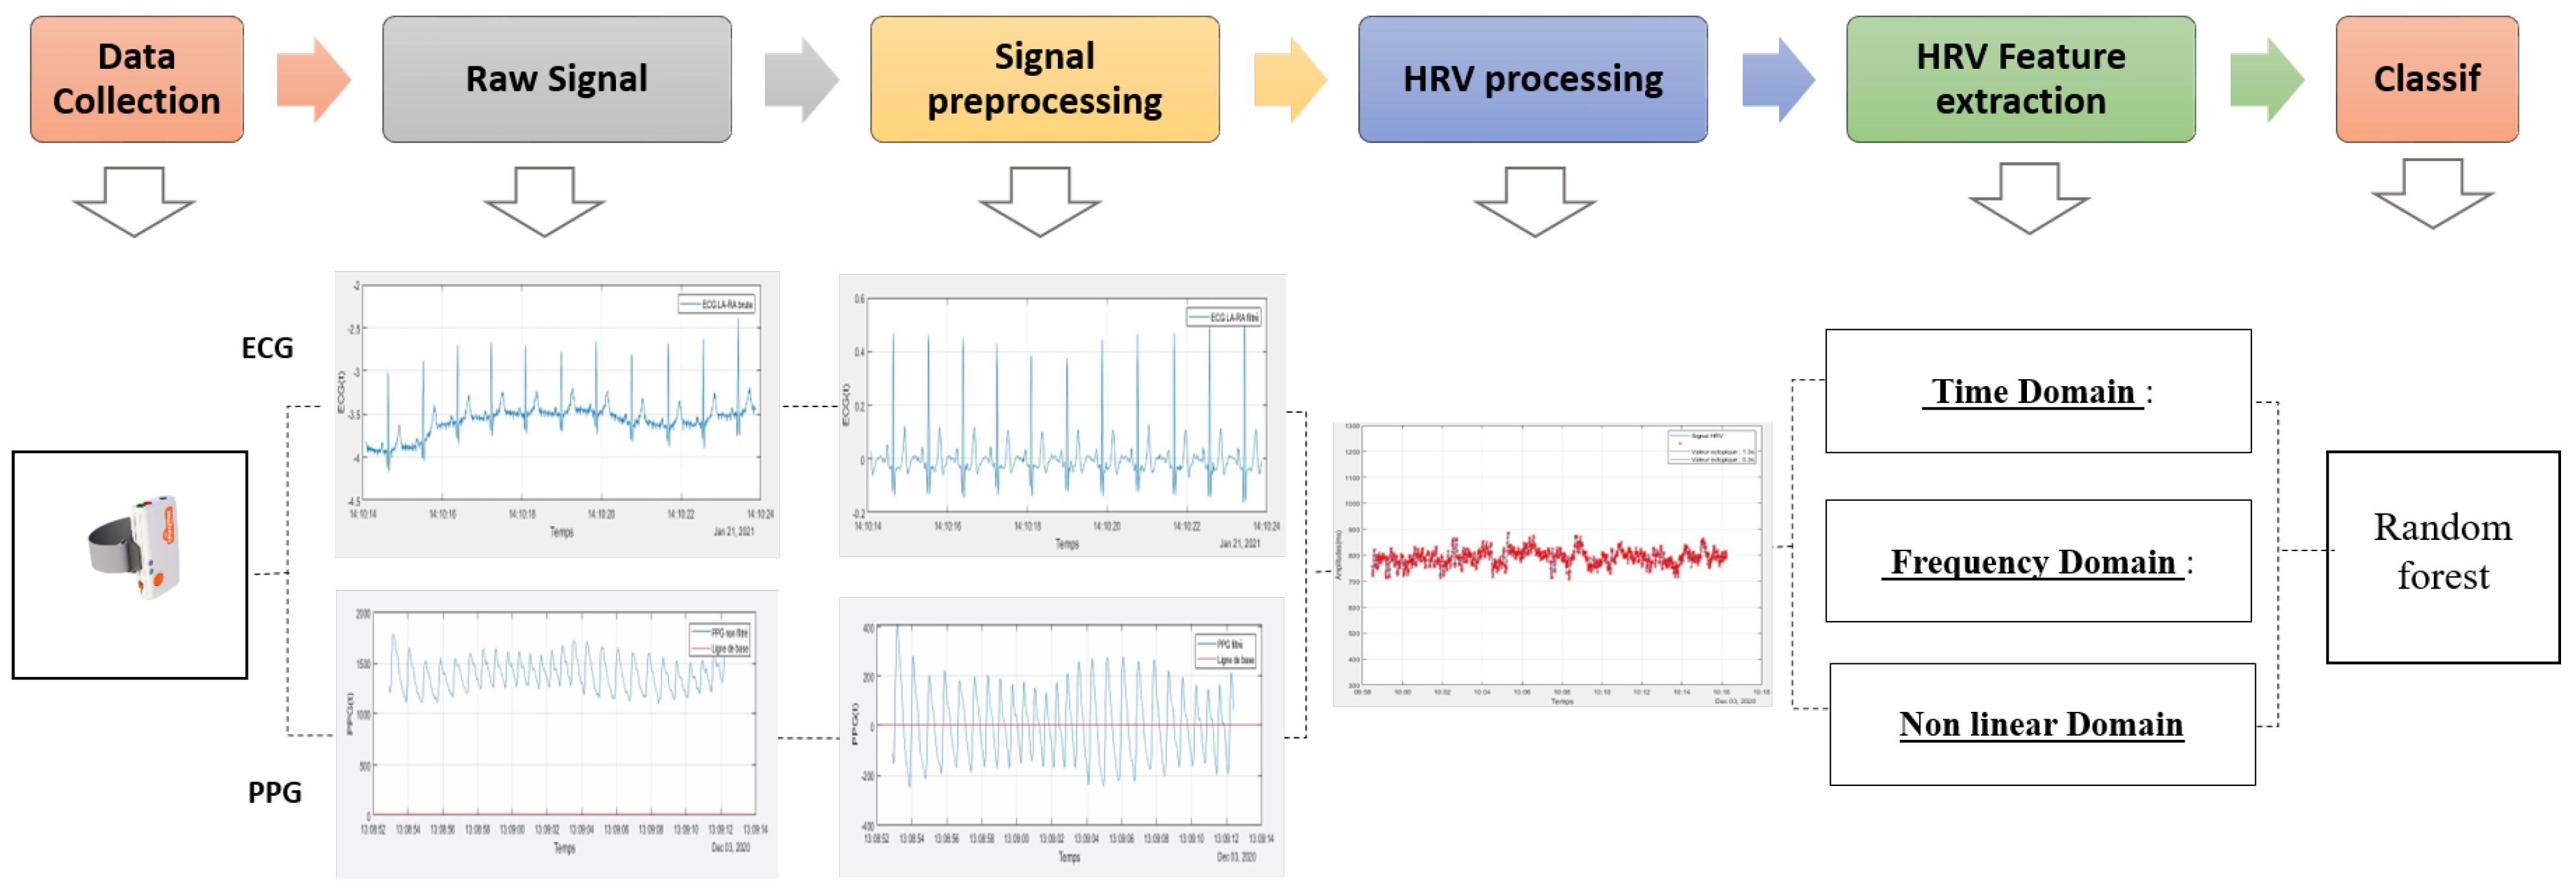 inexpensive hrv software